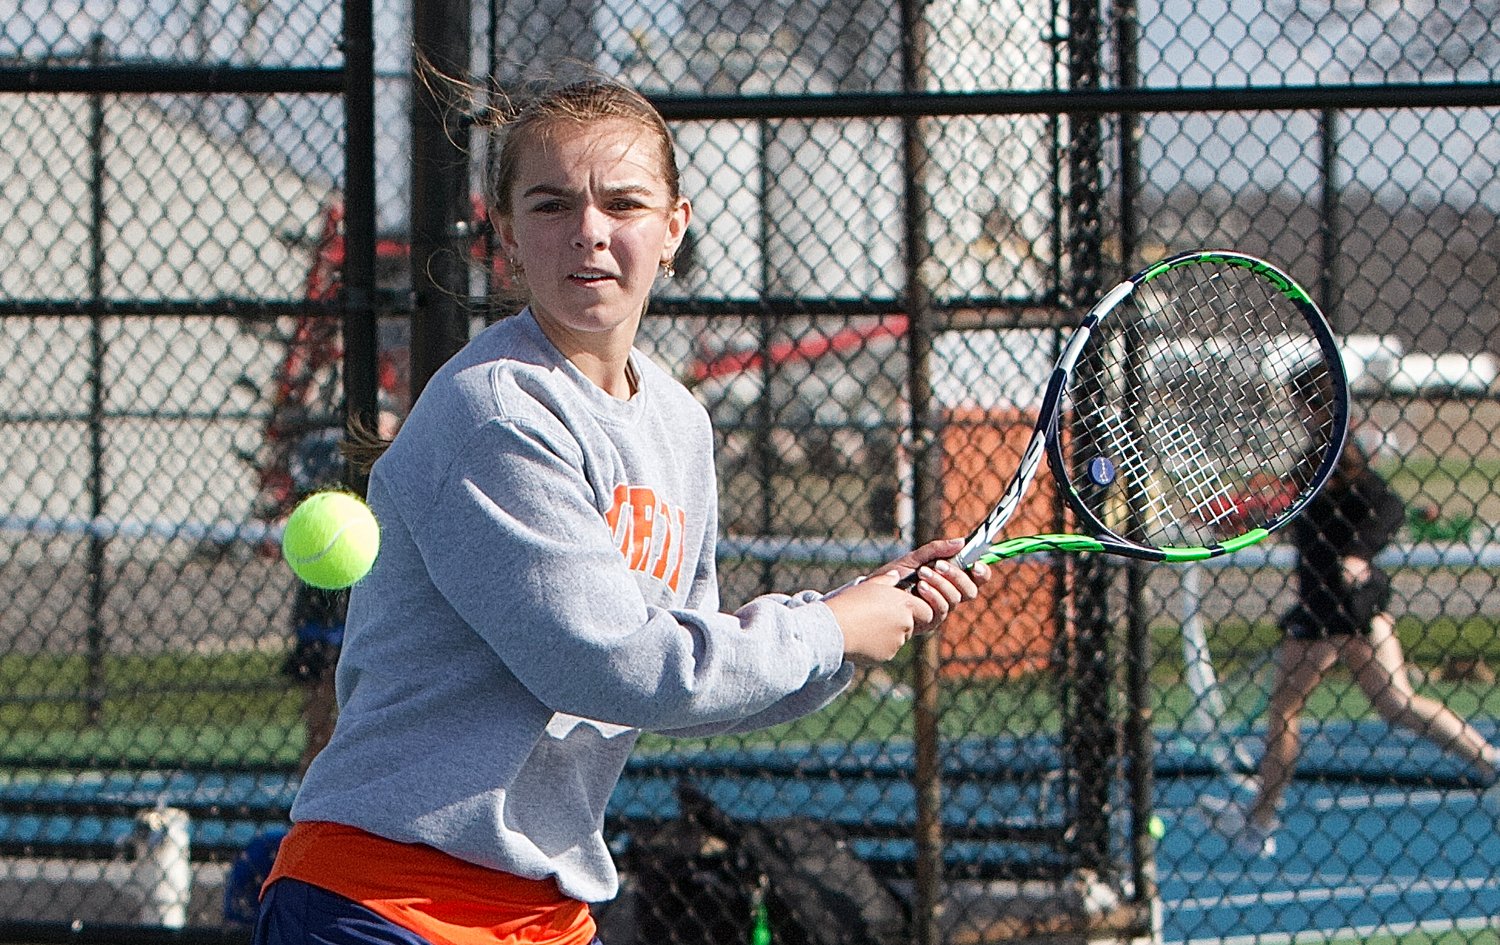 Sydney Neideffer competed at No. 2 singles for the Chargers.